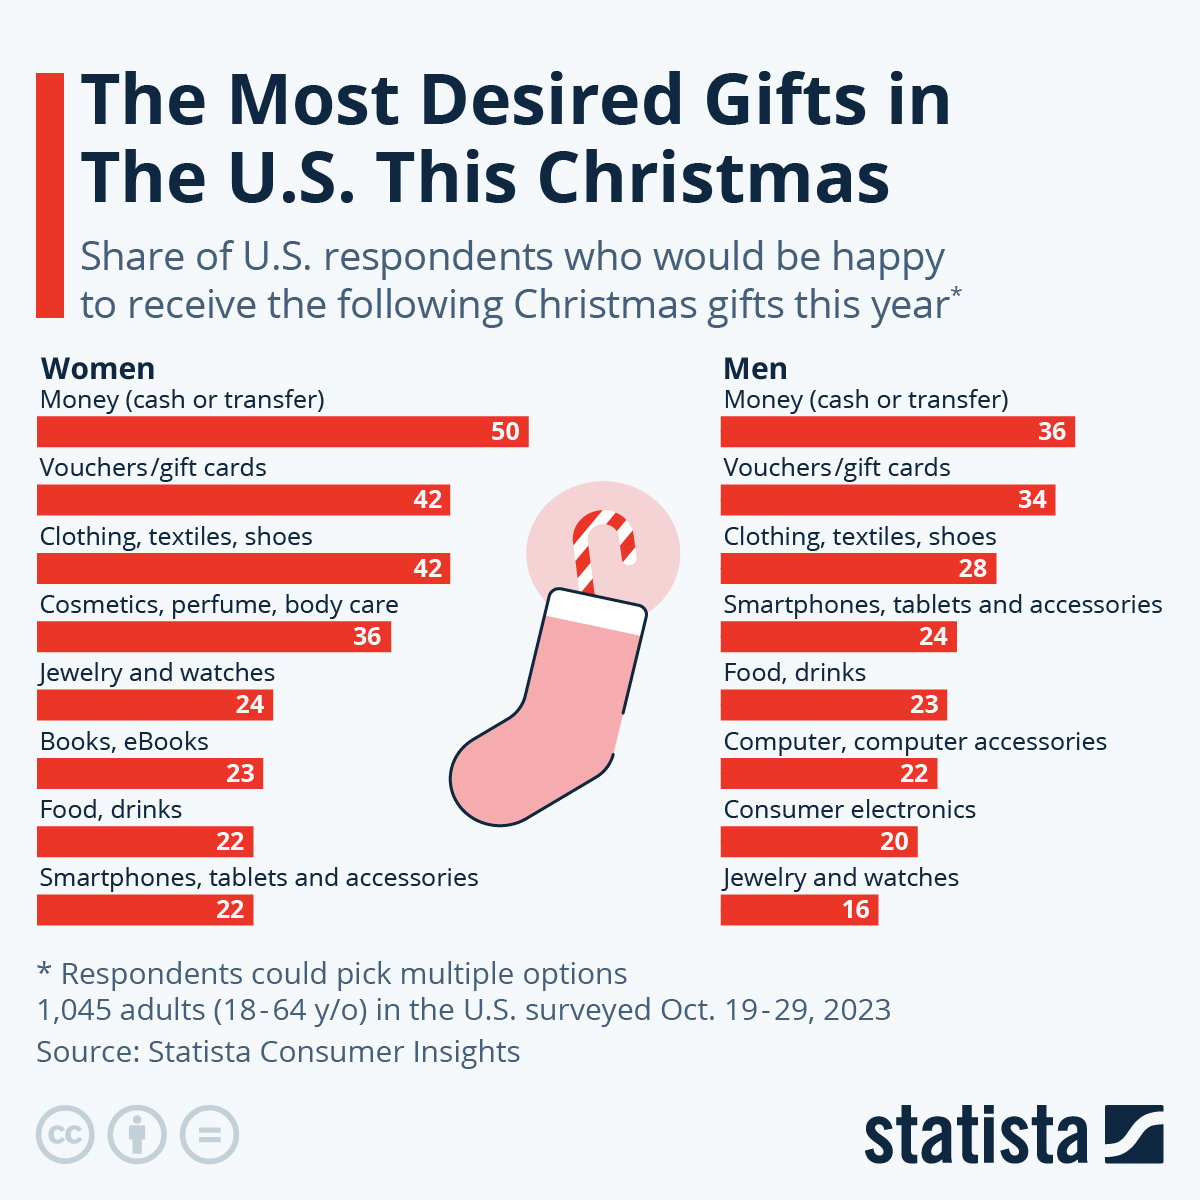 An infographic of the Most Desired Christmas Gifts in The U.S.